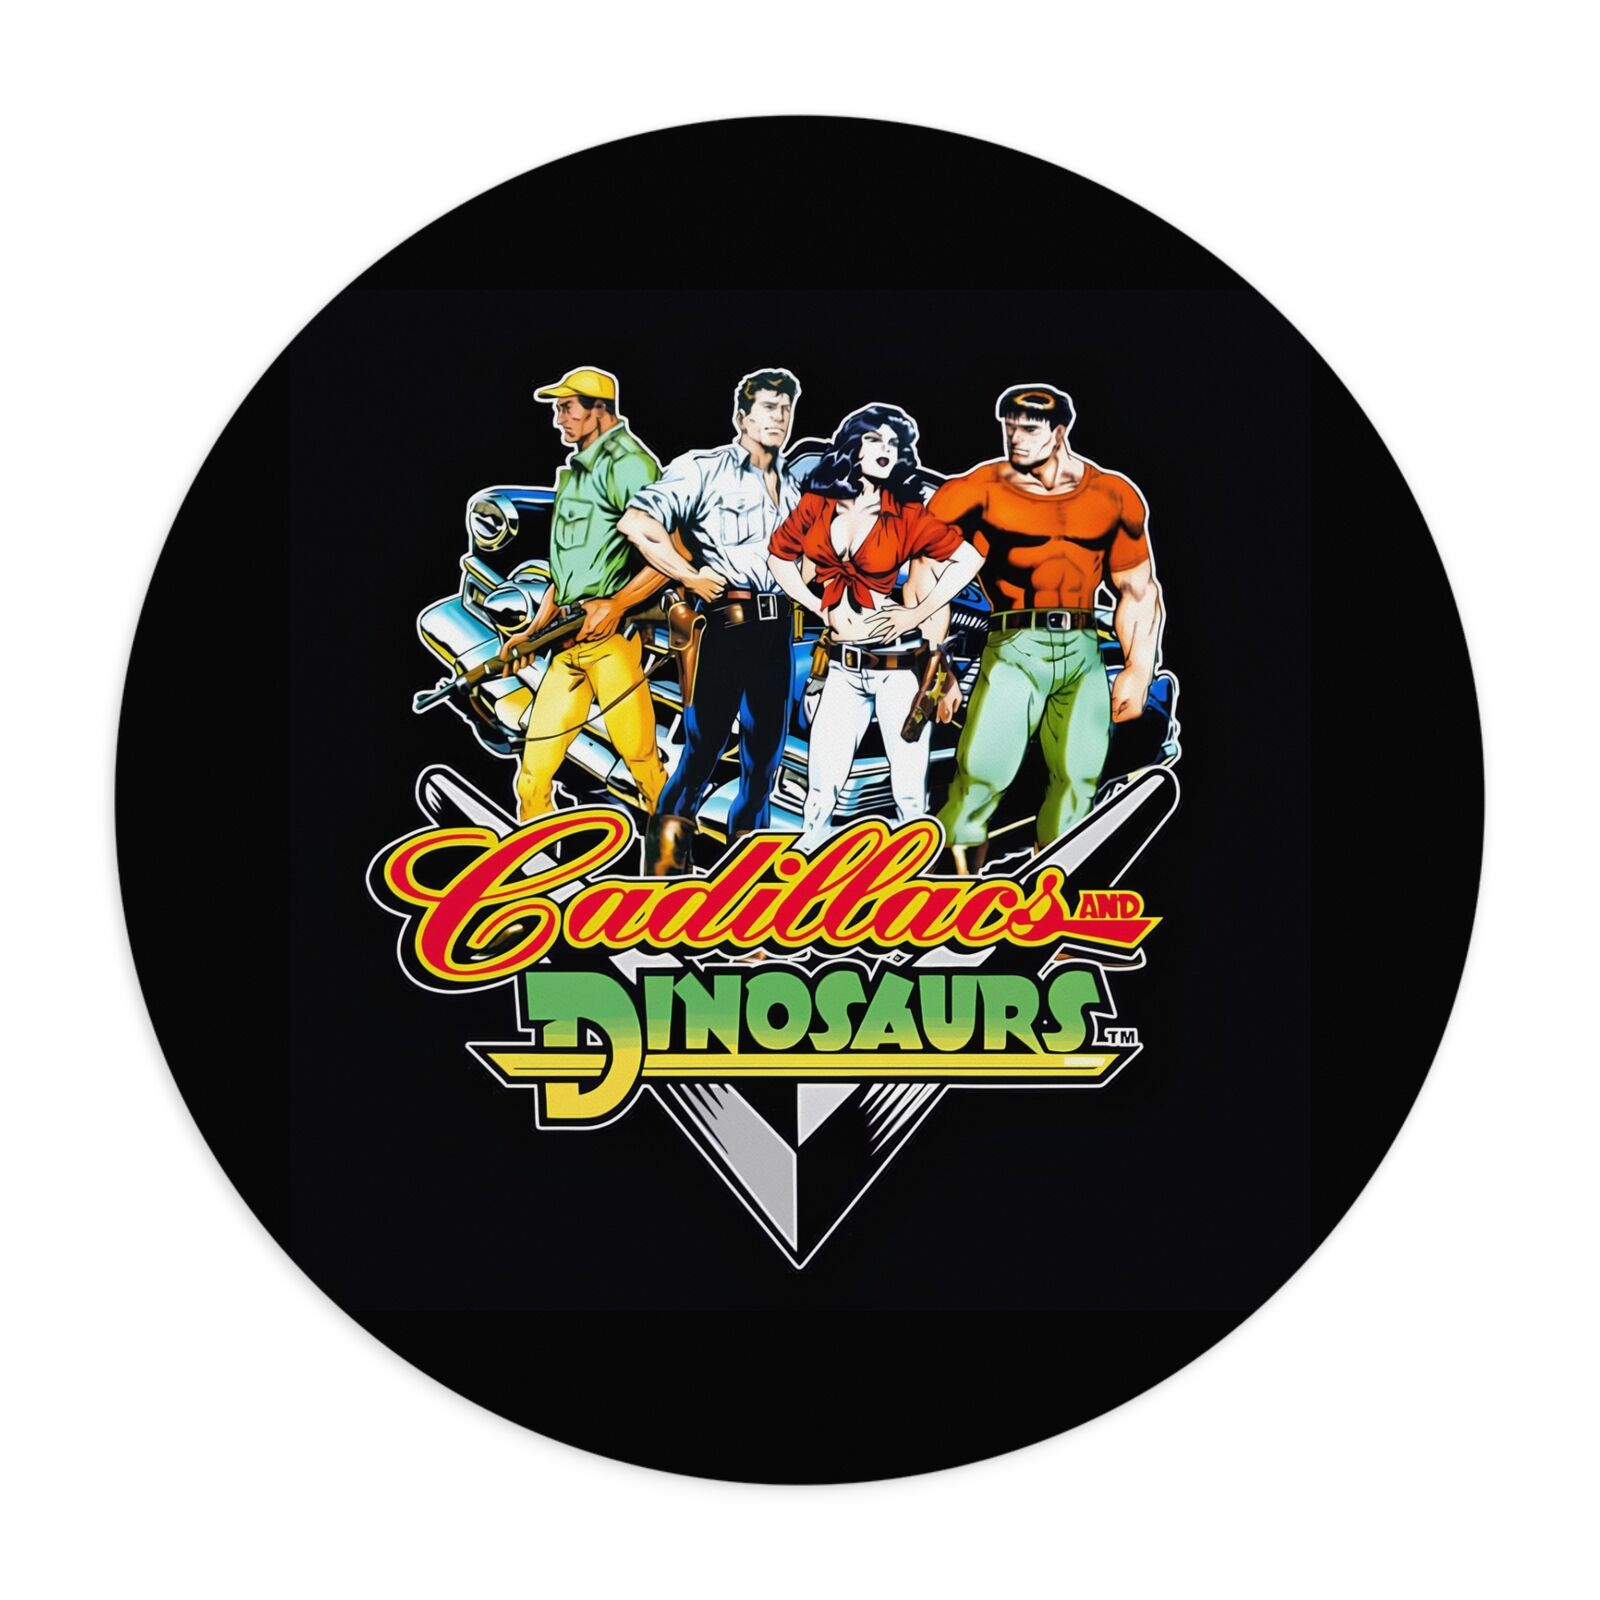 Mouse Pad  Cadillacs and Dinosaurs fan retrogame